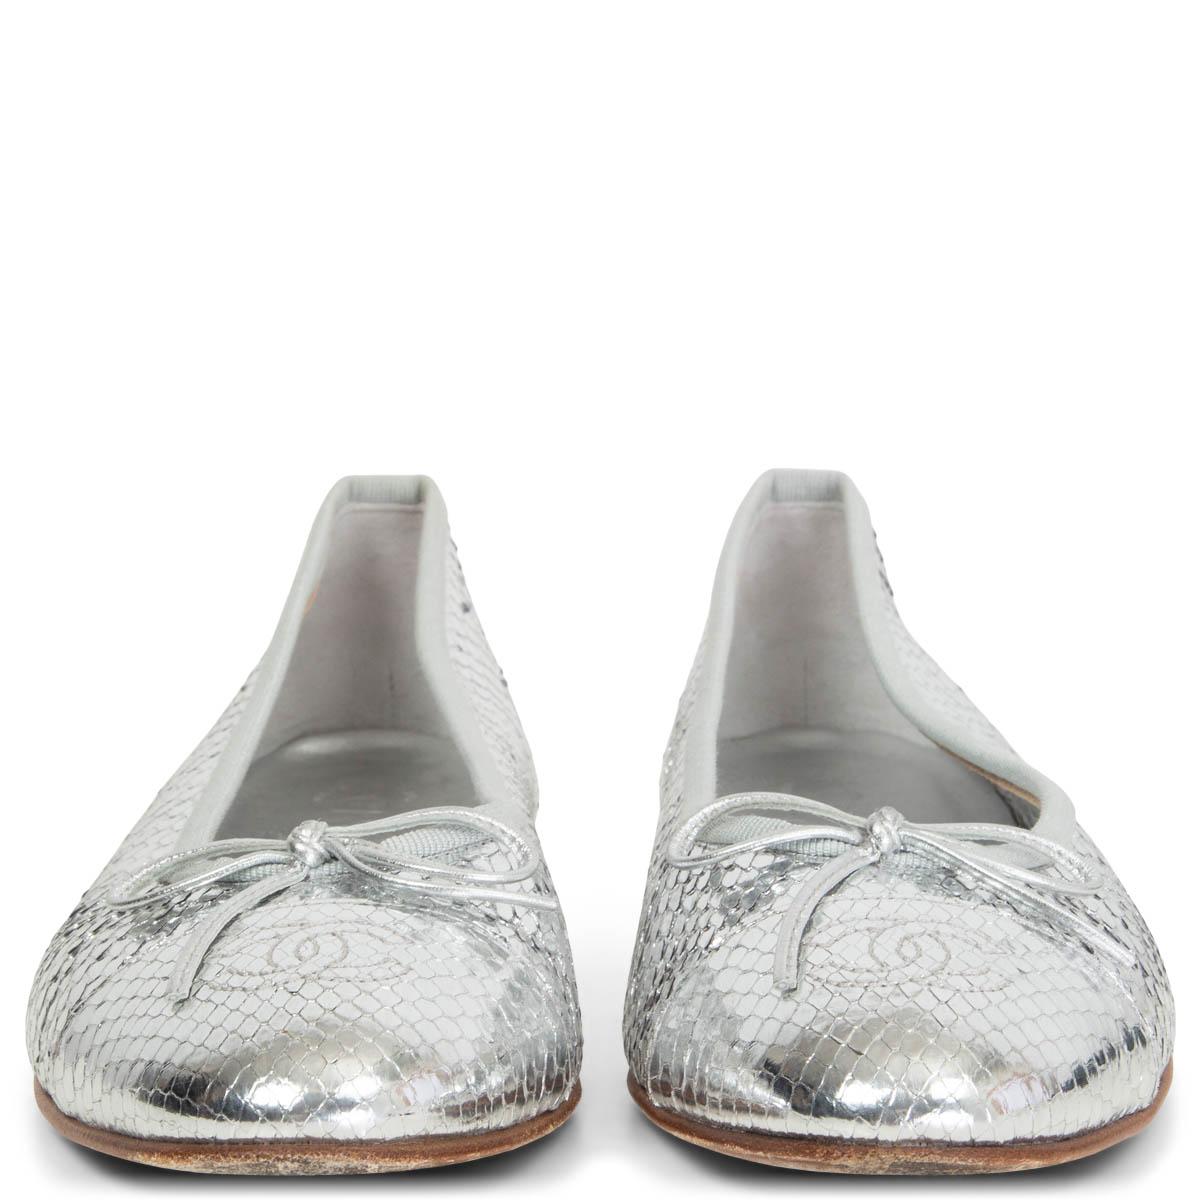 100% authentic Chanel classic ballet flats in silver python embellished with bow detail. Have been worn and are in excellent condition. Come with dust bag.

Measurements
Imprinted Size	39
Shoe Size	39
Inside Sole	25.5cm (9.9in)
Width	8cm